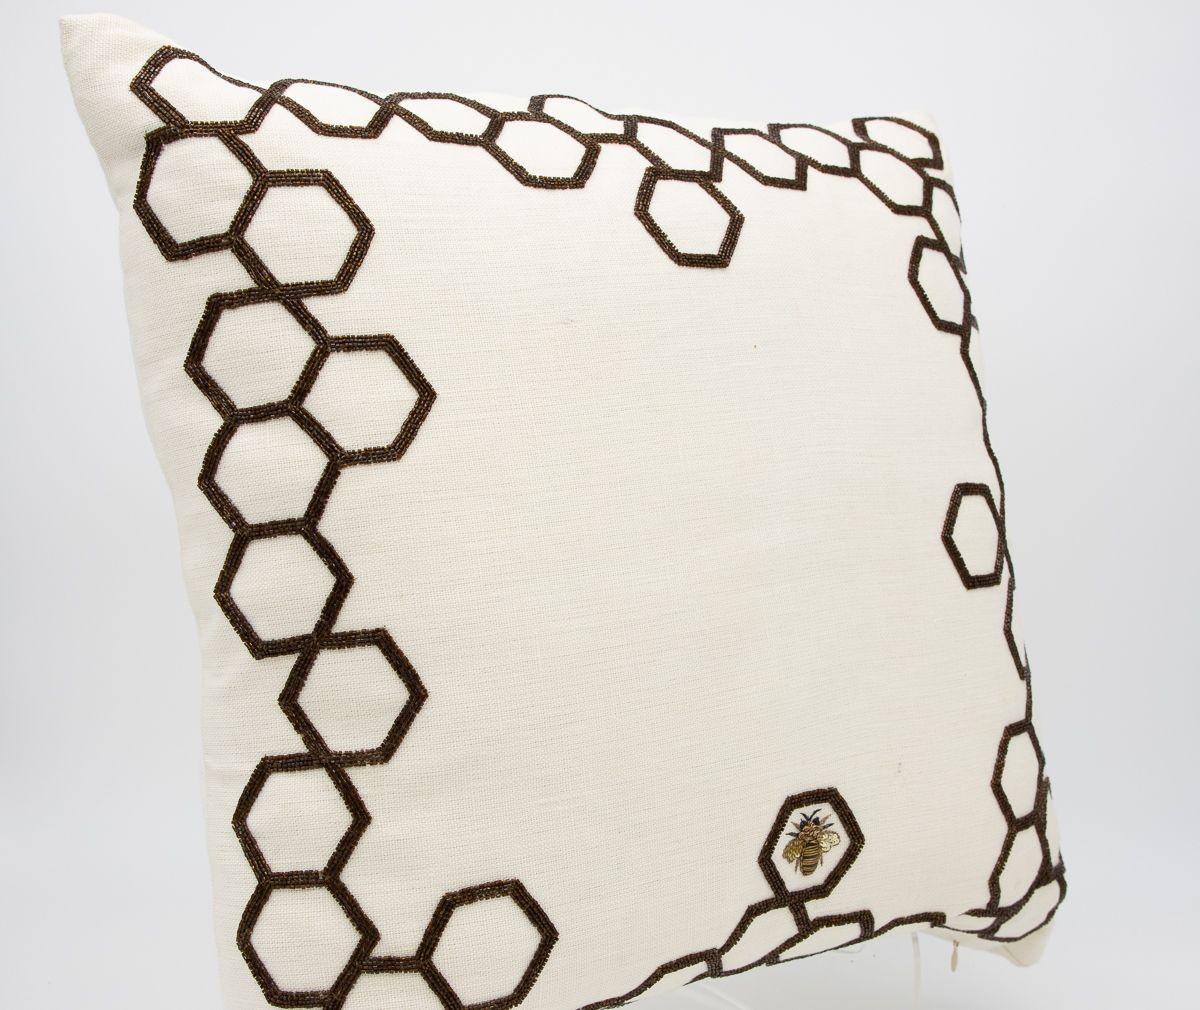 A wonderful hand-beaded pillow. Deep golden toned beads are sewn on a white linen to create an intricate honeycomb pattern along the edges of the pillow. One honeybee is centered within a single honeycomb shape. The reverse is made of the same